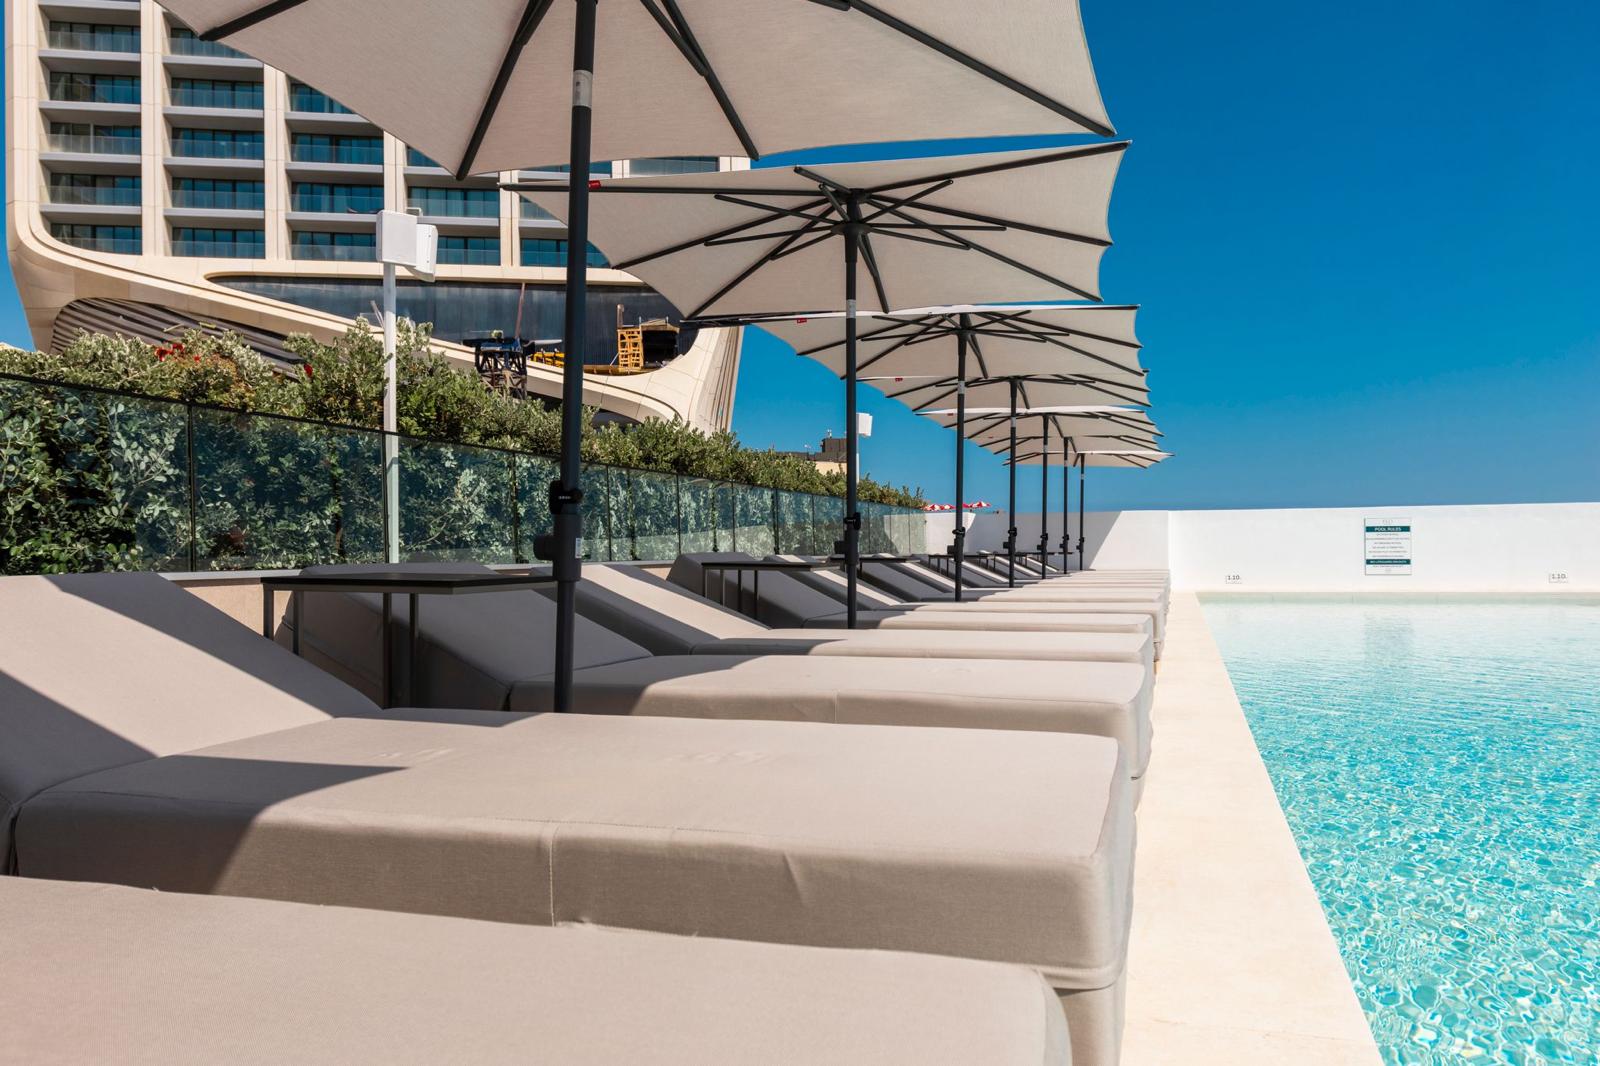 Experience the Ultimate Summer Escape at FLO: Malta’s New Rooftop Beach Club